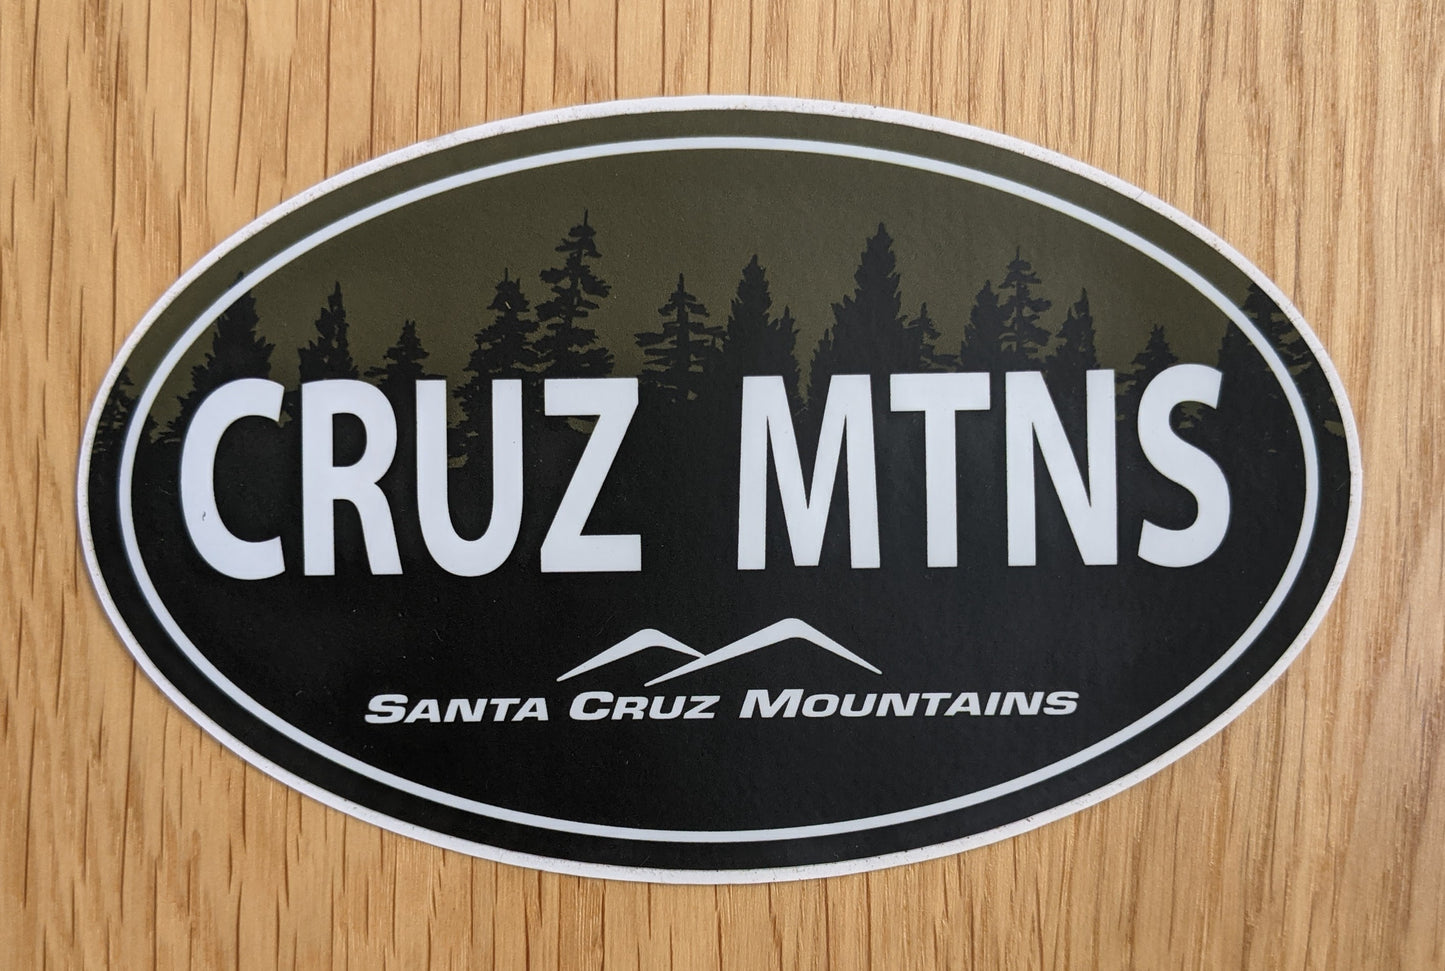 Oval Cruz Mtns sticker with forest silhouette, by SCM Clothing